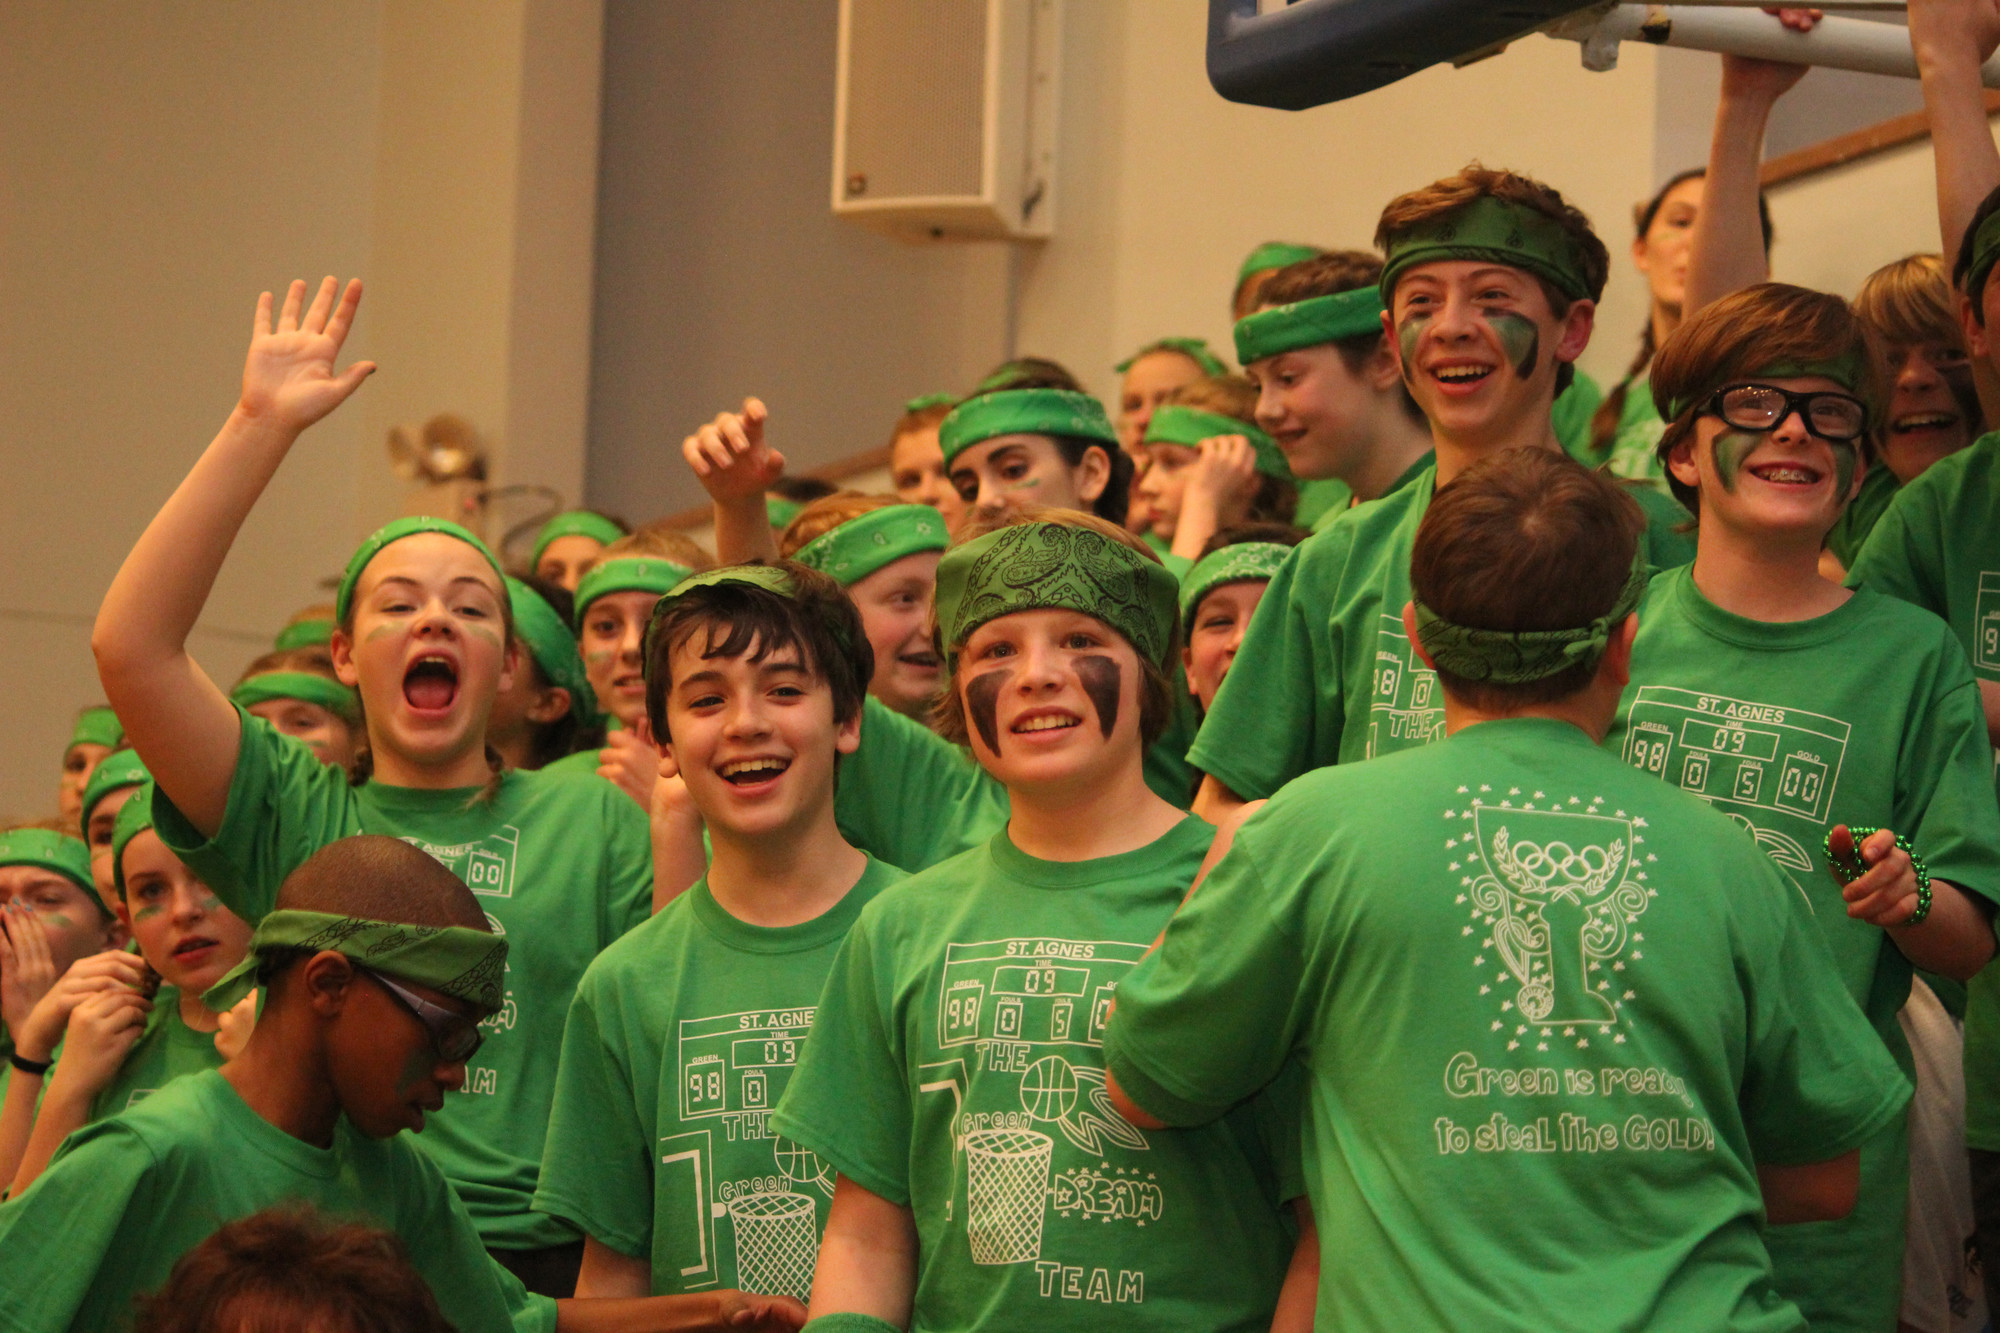 Green Team members watched and cheered from the stands while their teammates competed in events.